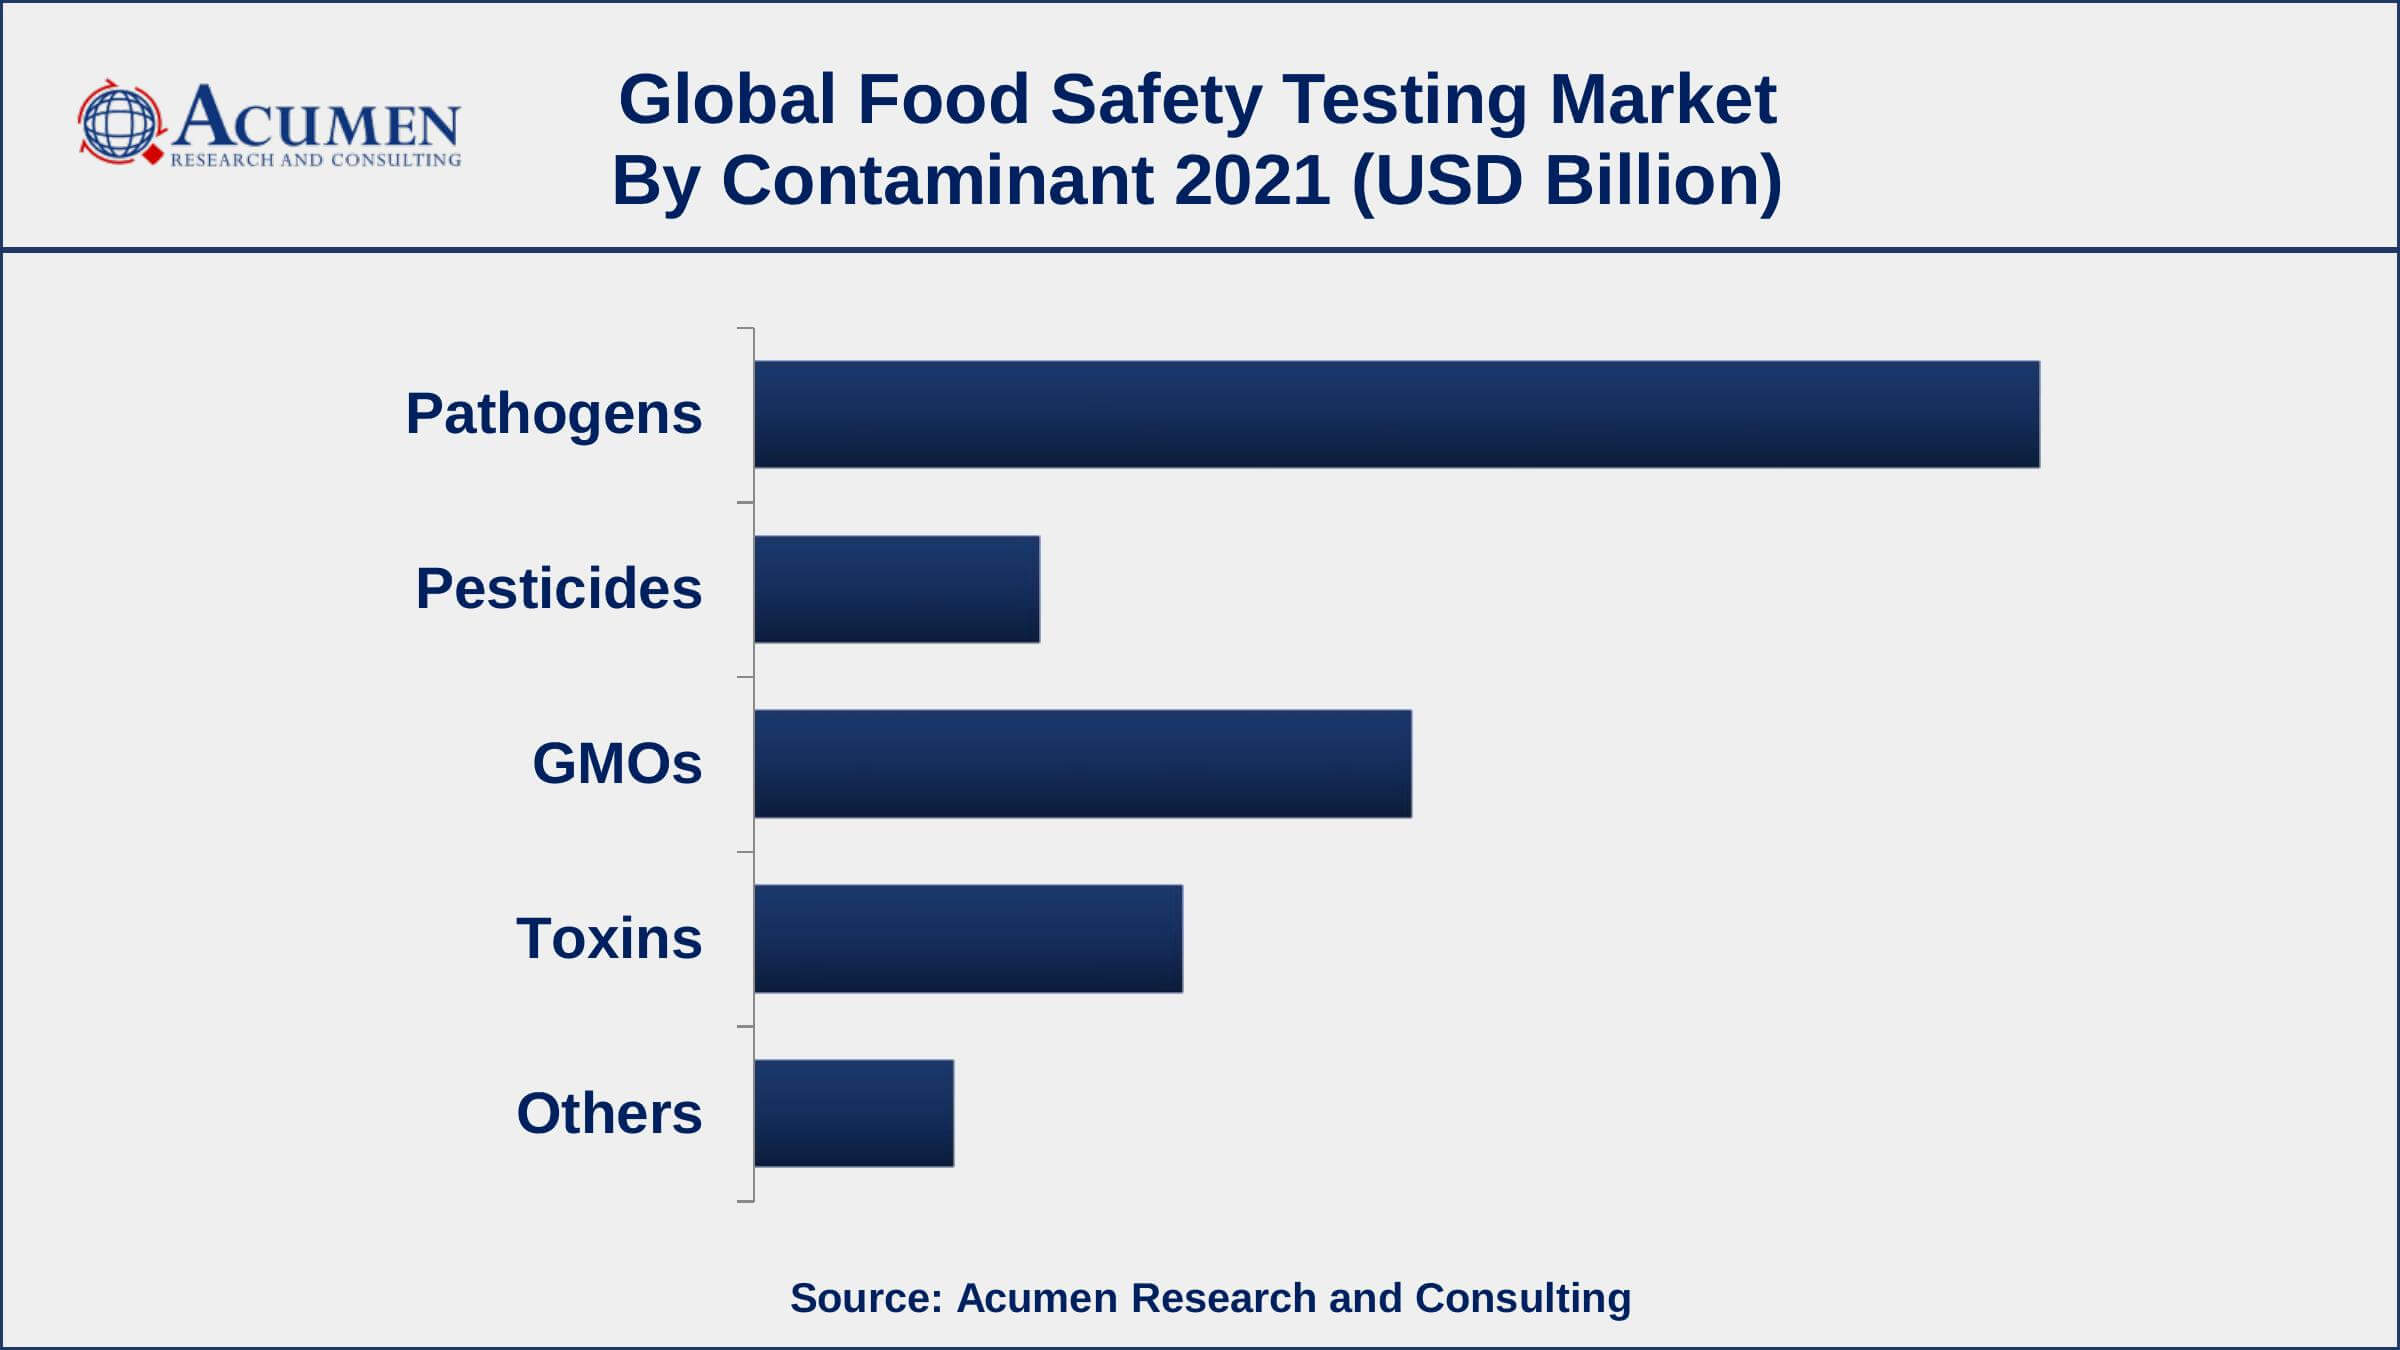 By contaminant, pathogen segment engaged more than 44% of the total market share in 2021